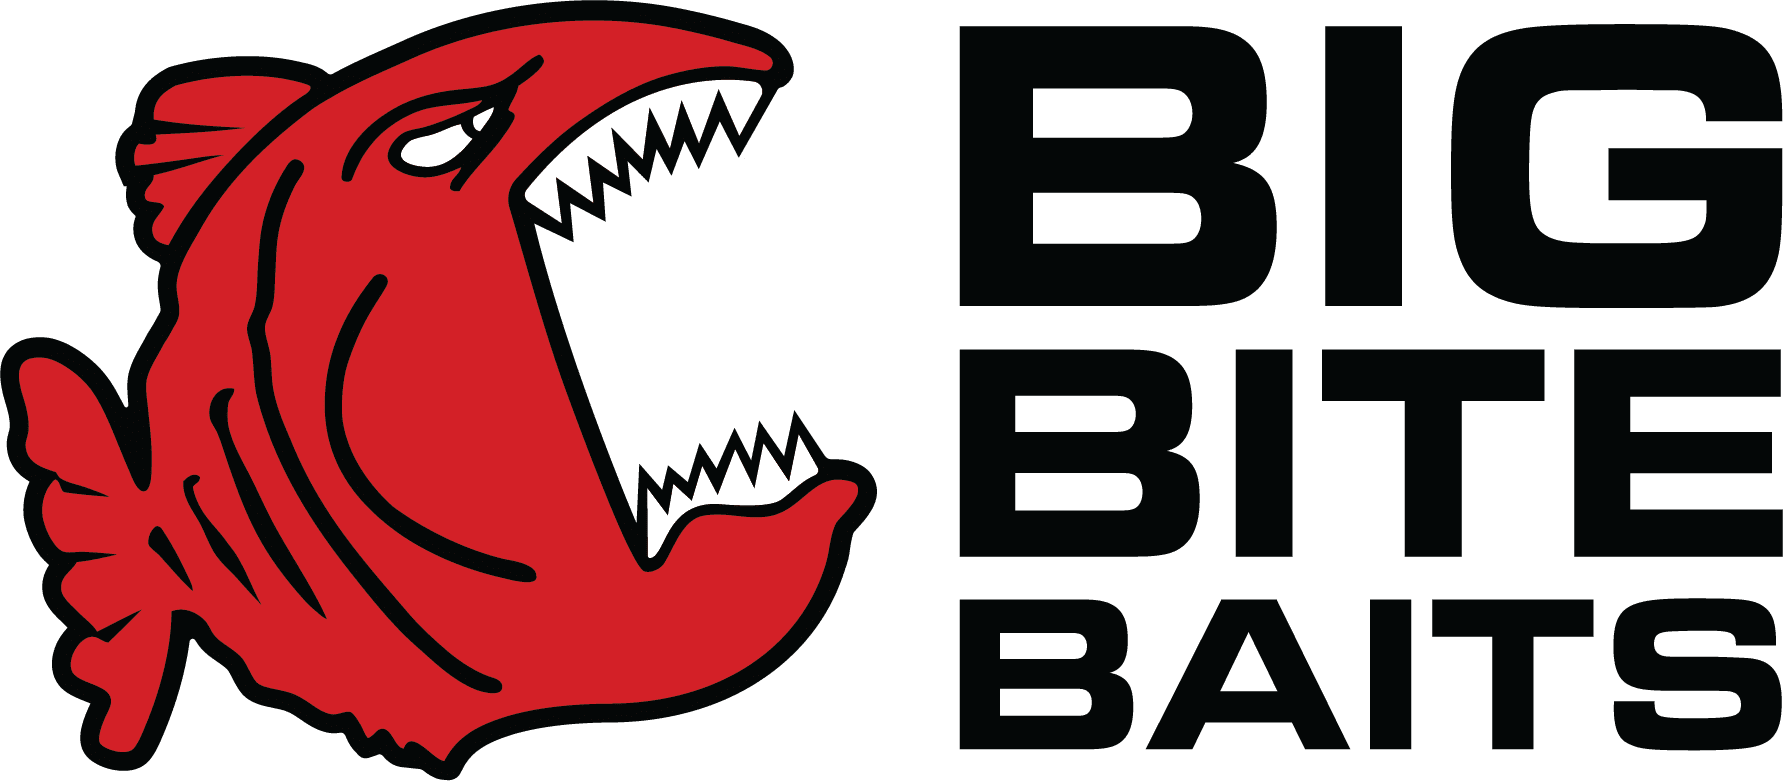 Big Bite Baits Fishing Lures - Our popular Big Bite Baits Fishing Lures  Craw Tube are available in Mega Packs! Stock up now for the spring flipping  bite! #bigbitebaits